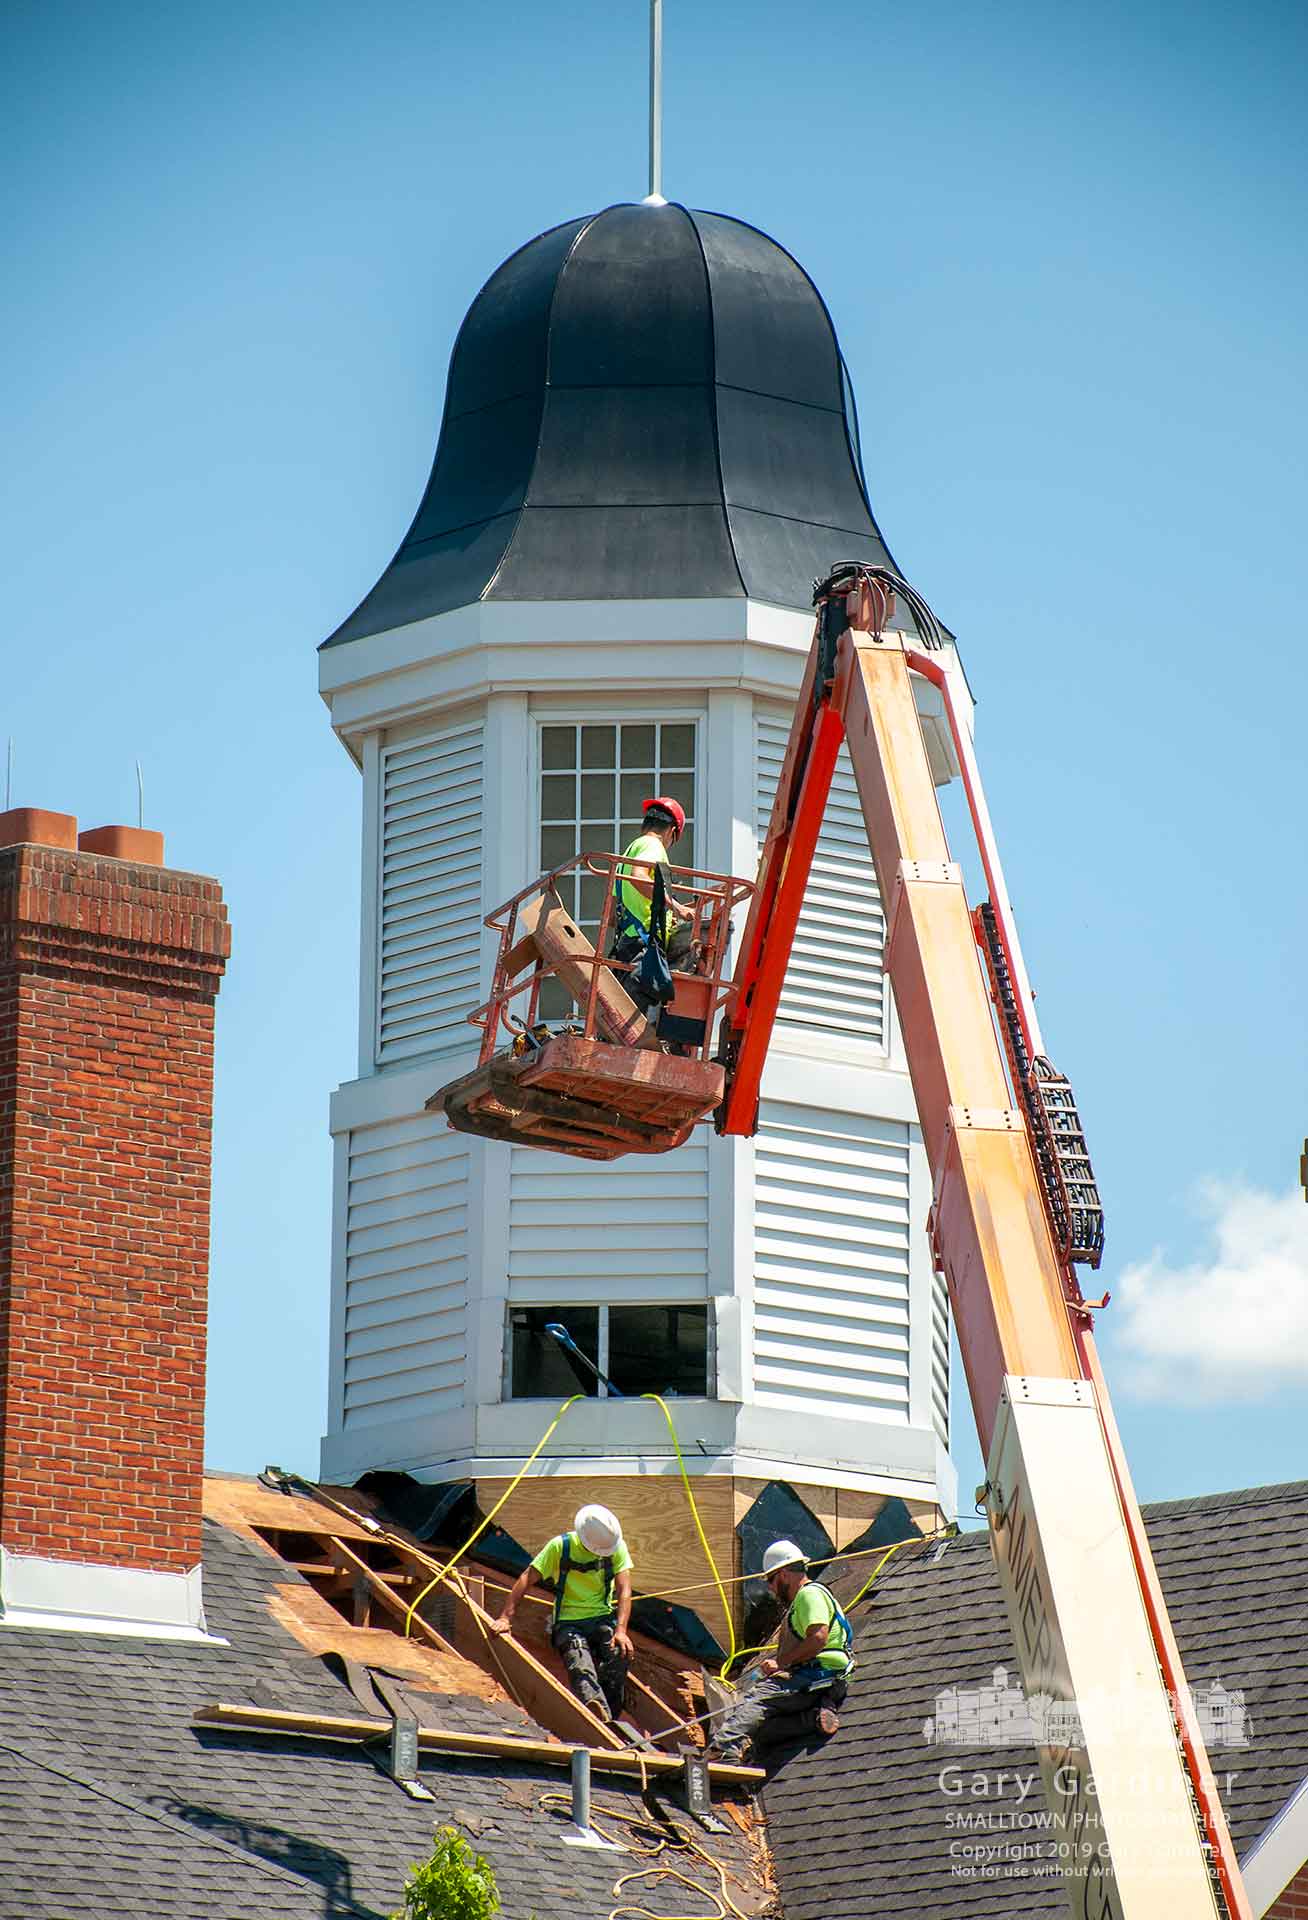 The construction crew works to complete repairs of the support and roofing at the base of the cupola at city hall after replacing it over the weekend at the end of the second phase of the project. My Final Photo for June 3, 2019.